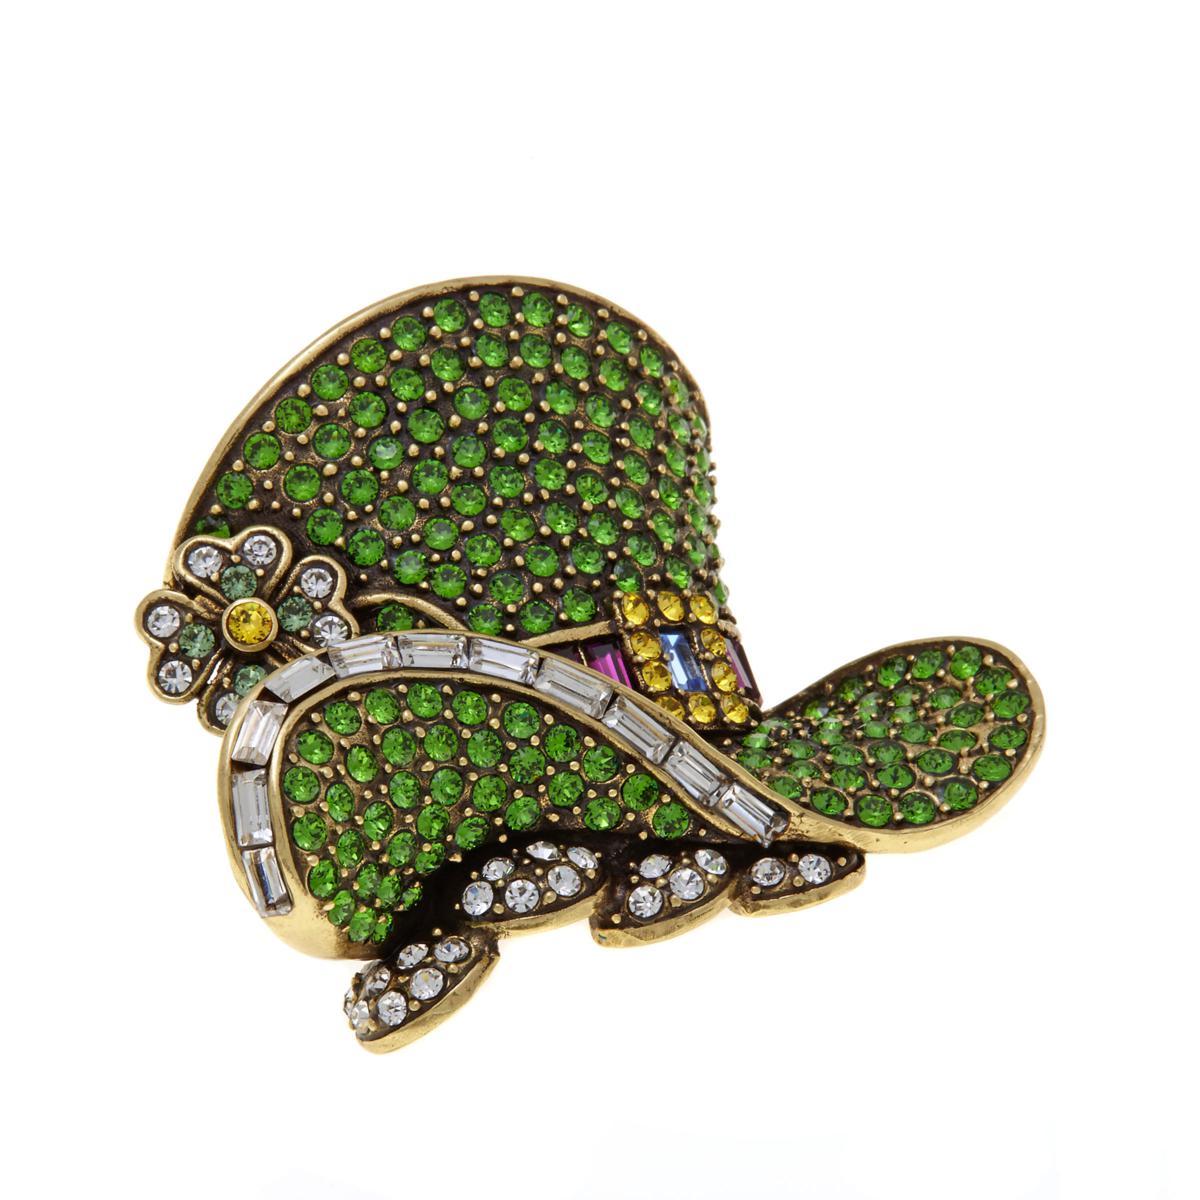 Channel the luck of the Irish all year round with this pretty 4-leaf clover pin. Sparkling with crystals and given a signature Heidi look, it's a lot of style for a wee bit o' money.

Design Information
Dimensional Leprechaun-inspired top hat